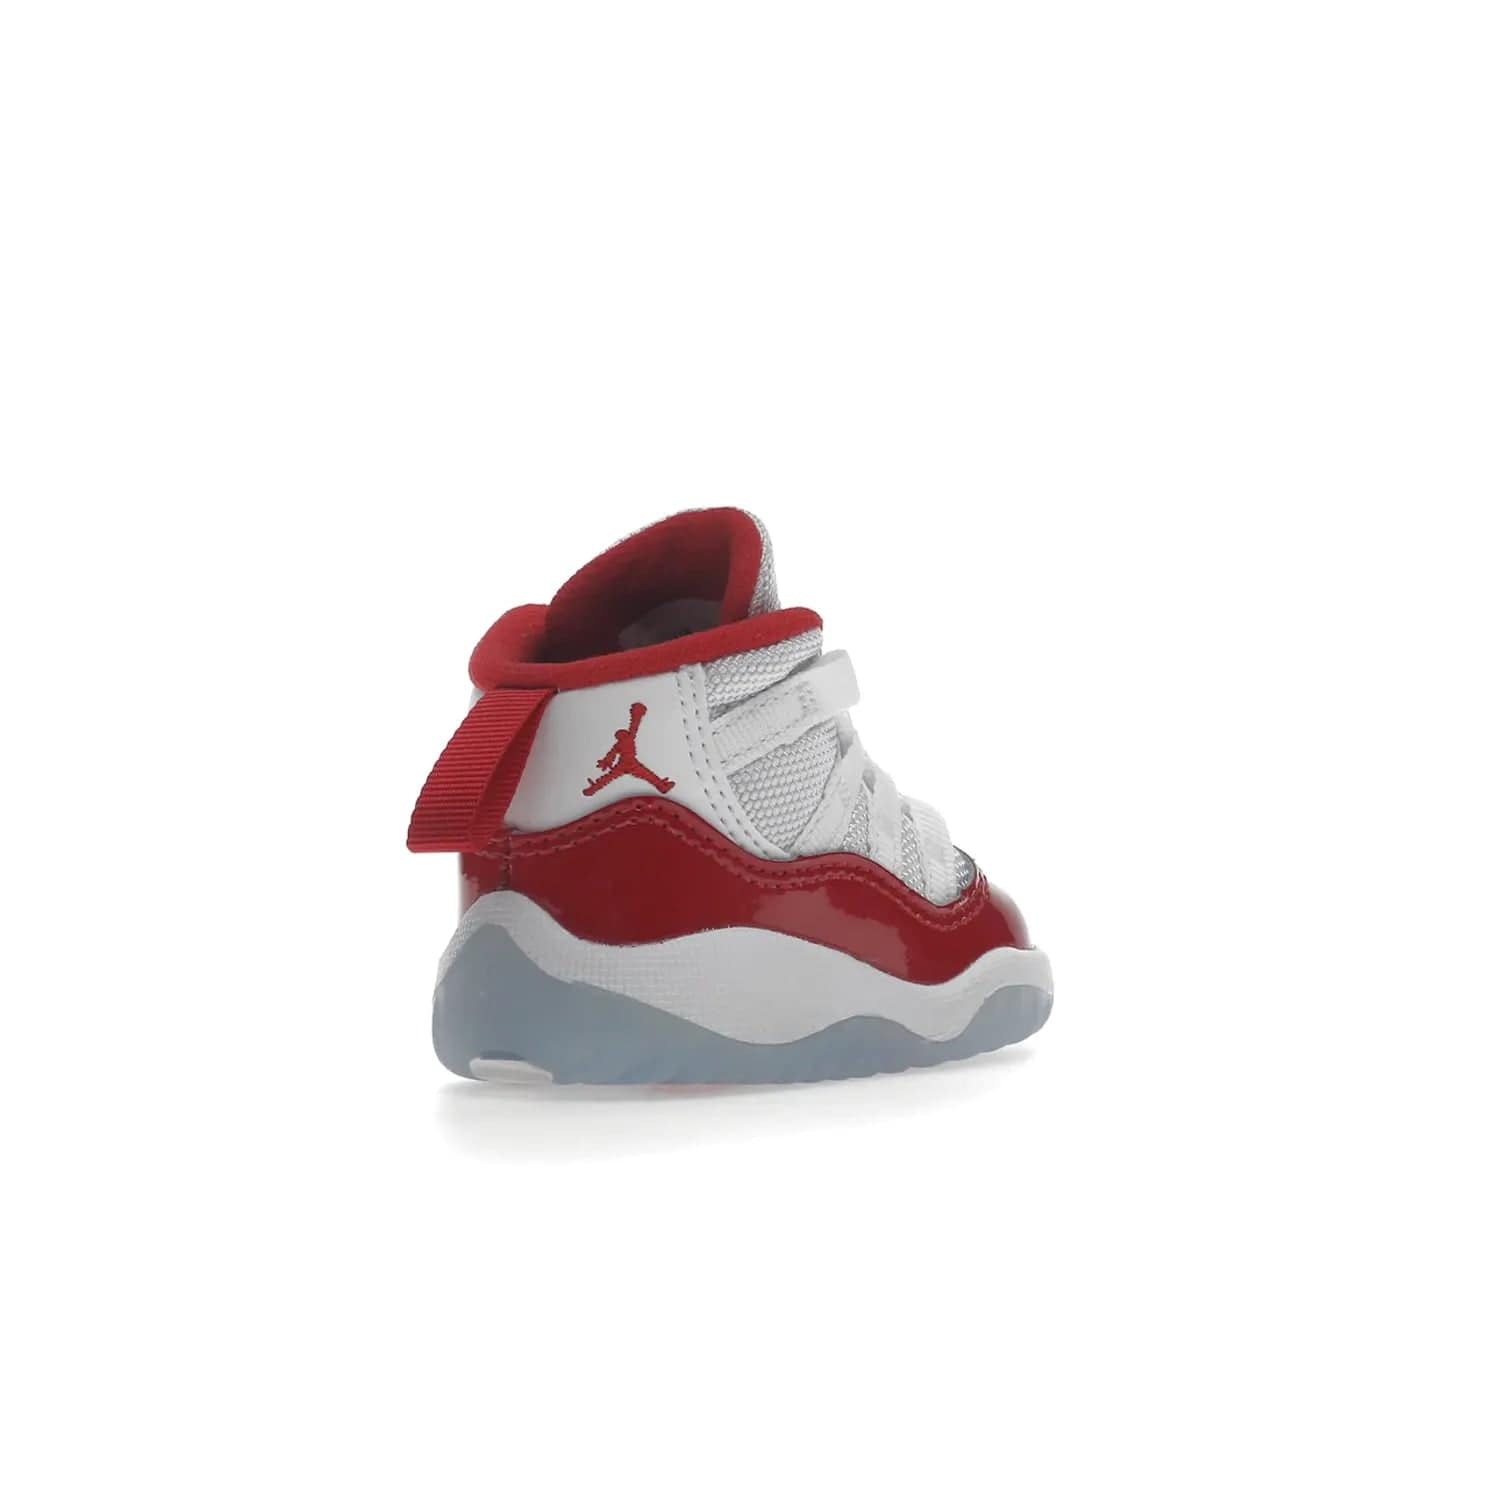 Jordan 11 Retro Cherry (2022) (TD) - Image 32 - Only at www.BallersClubKickz.com - Timeless classic. Air Jordan 11 Retro Cherry 2022 TD combines mesh, leather & suede for a unique look. White upper with varsity red suede. Jumpman logo on collar & tongue. Available Dec 10th, priced at $80.